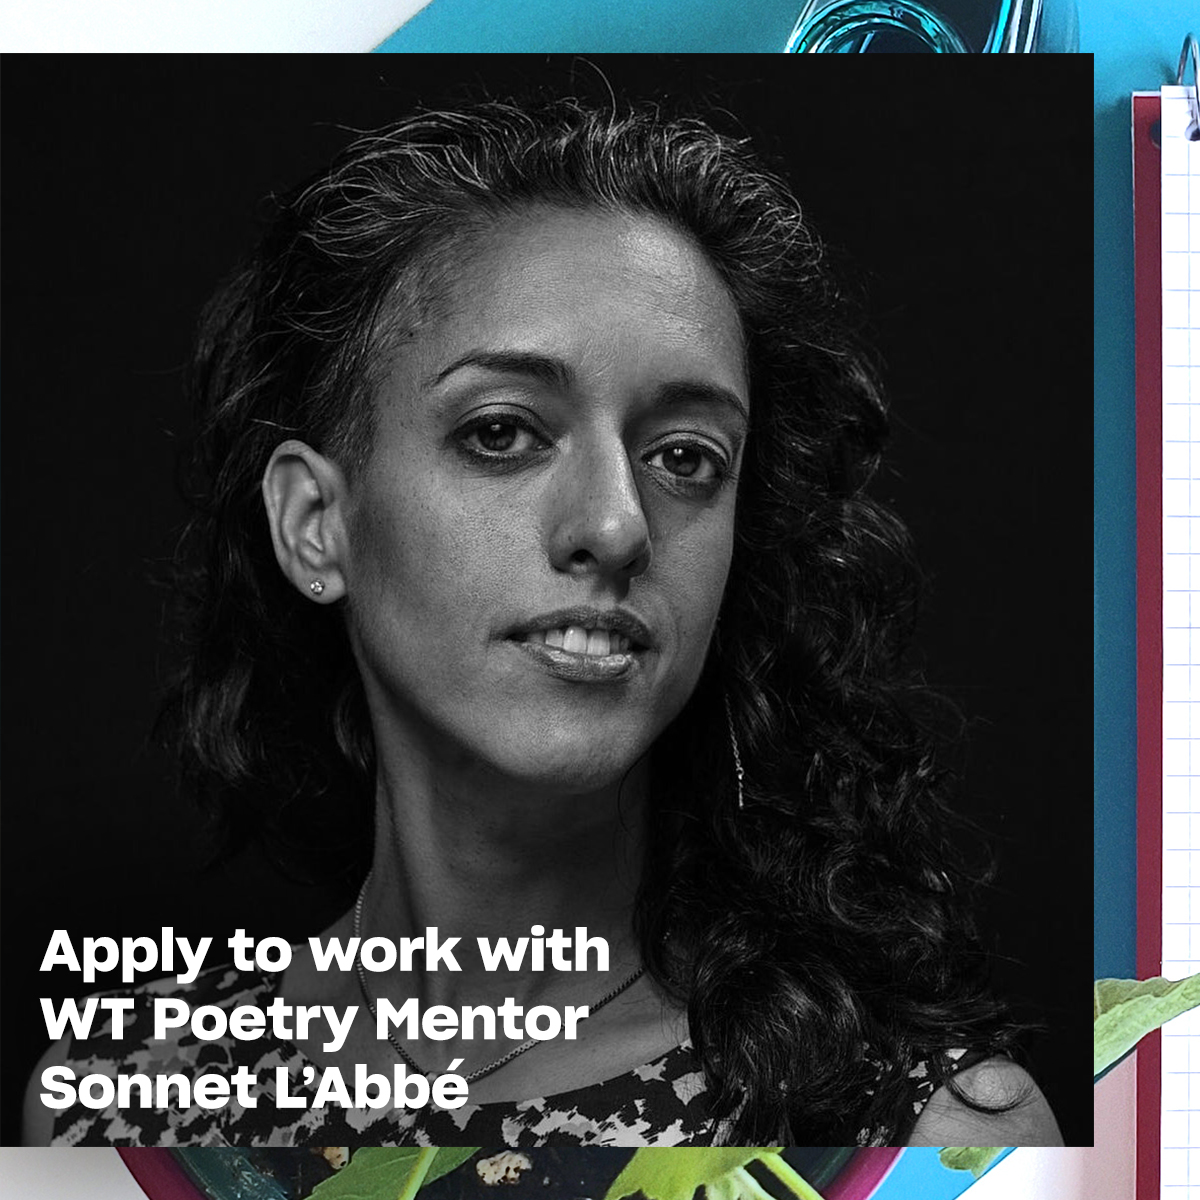 “What is worth the intensity of poetic attention? My ear listens for a voice confident in its musicality and purpose.” —@SonnetLAbbe, WT #PoetryMentor Submit your poetry manuscript by June 10: writerstrust.com/Mentorship #WTMentorship #poetrymonth #cdnpoetry #canlit #emergingpoets